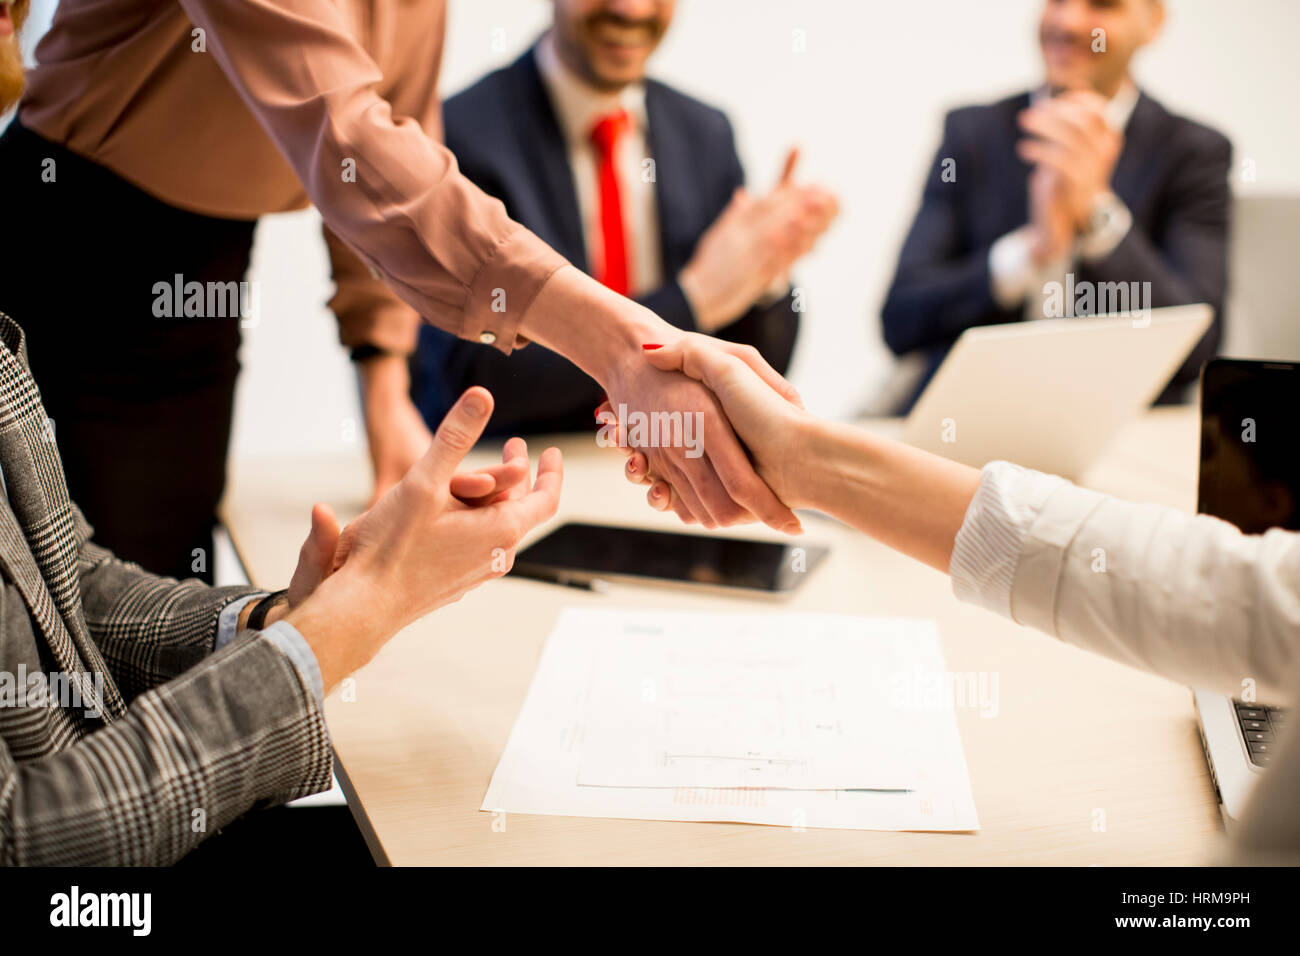 Business people shaking hands finir une séance in office Banque D'Images